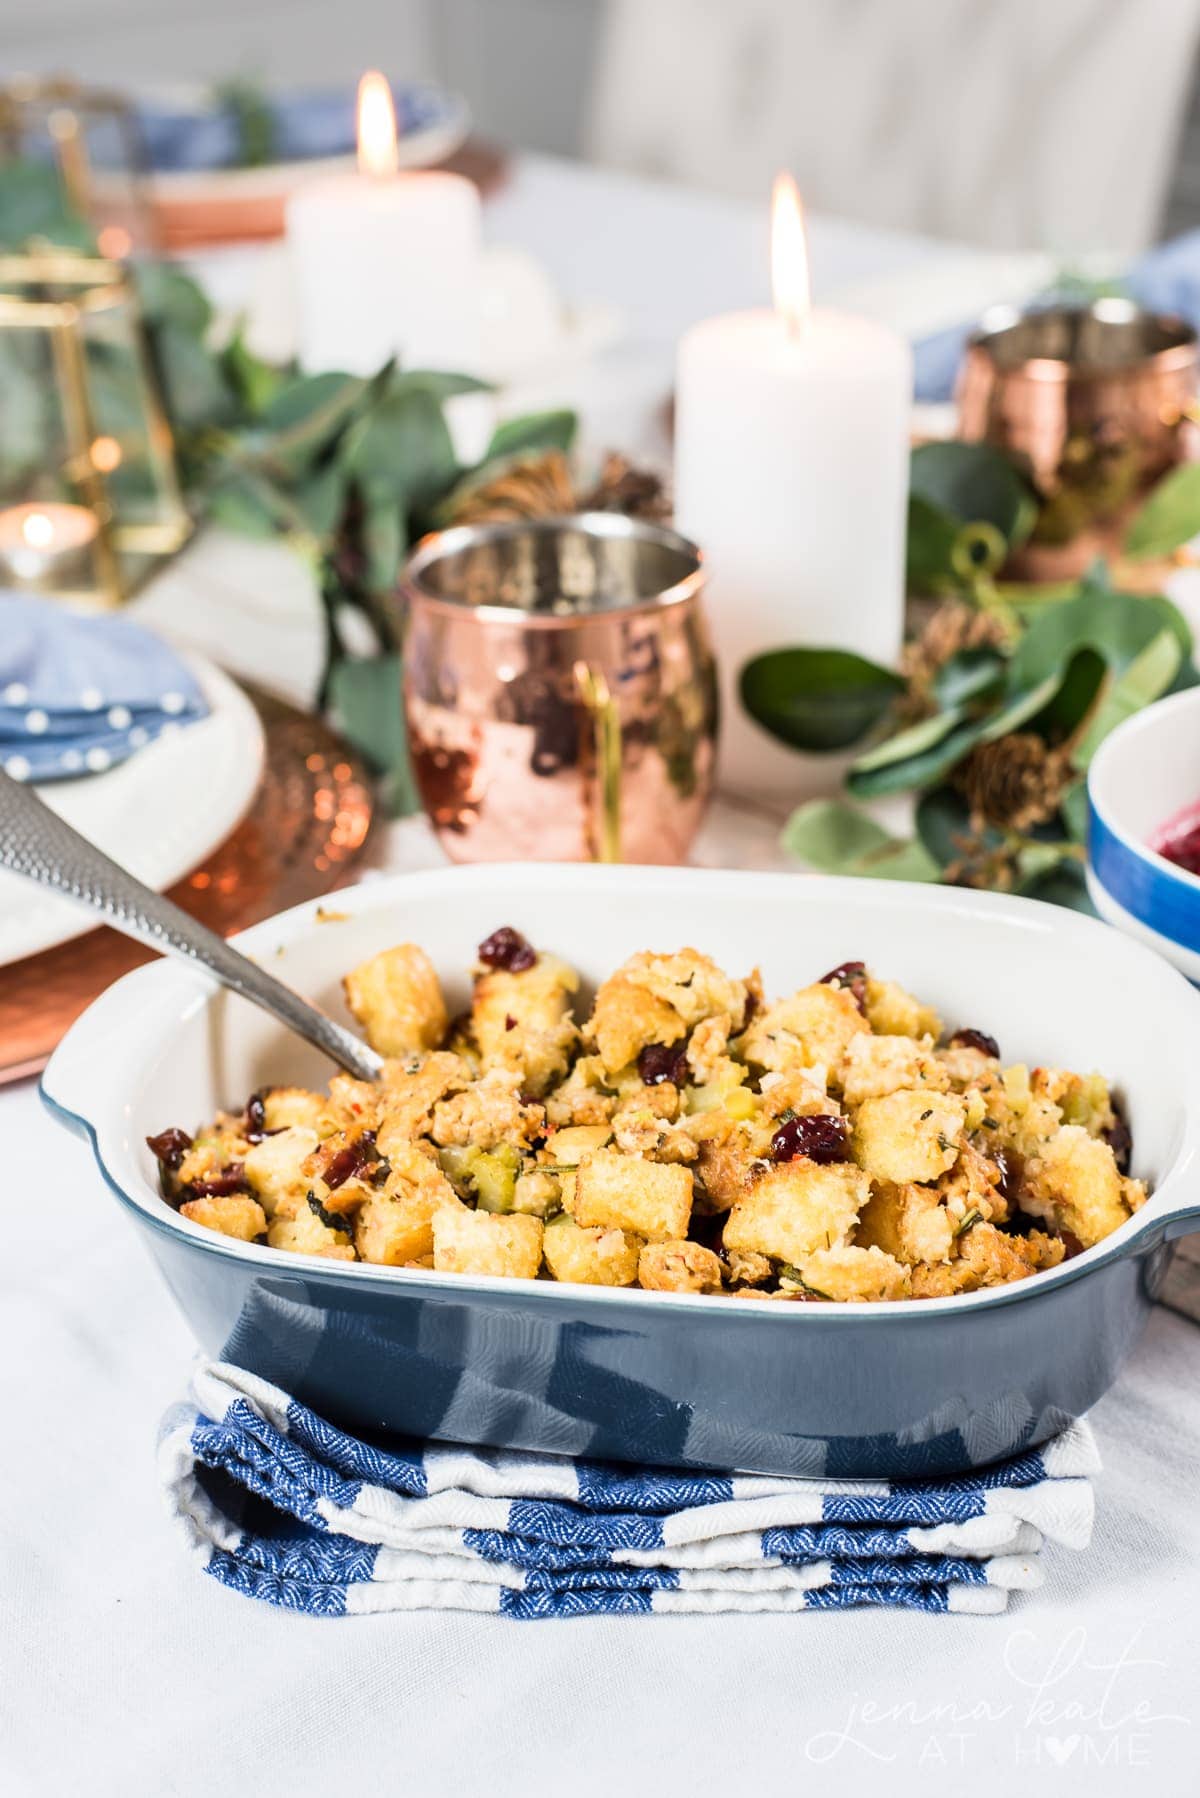 Traditional stuffing in a bowl around Thanksgiving table setting